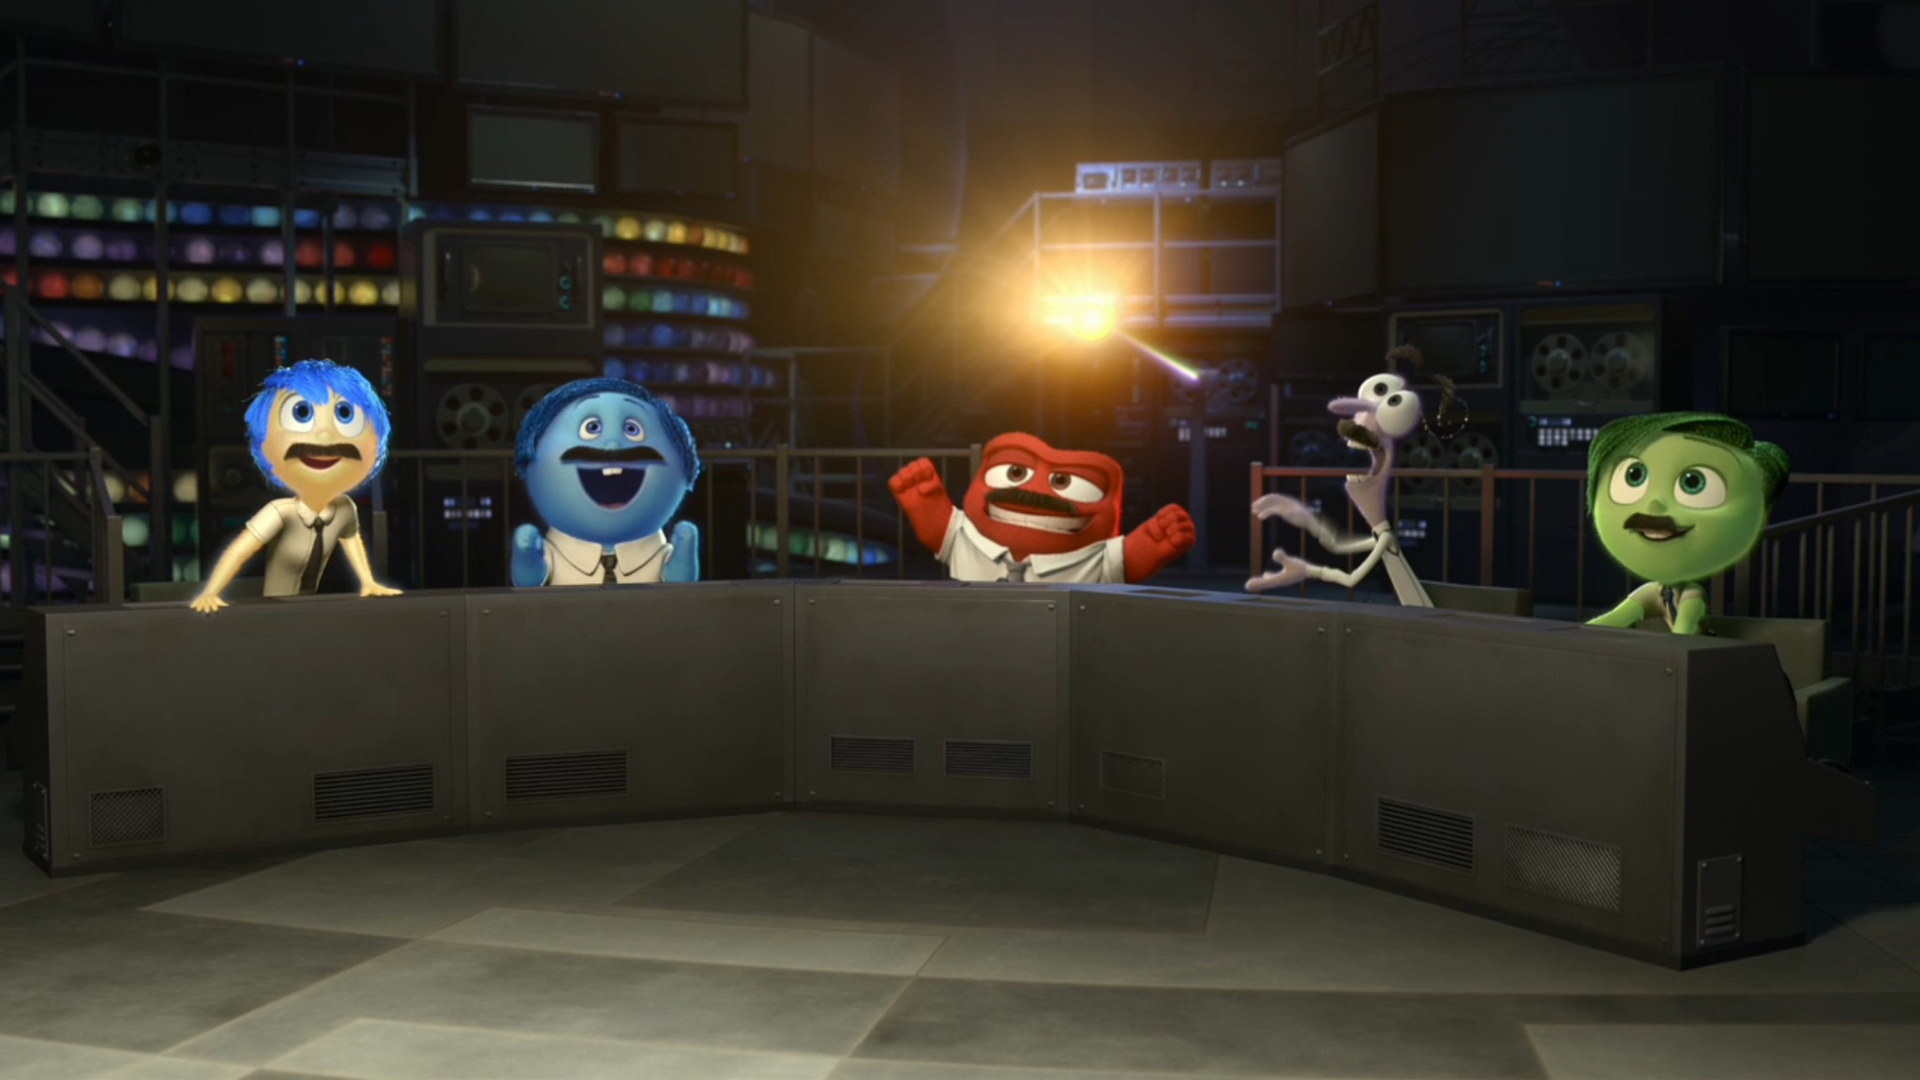 http://vignette4.wikia.nocookie.net/pixar/images/f/f3/Inside-Out-Father-Headquarters.jpg/revision/latest?cb=20141219005417